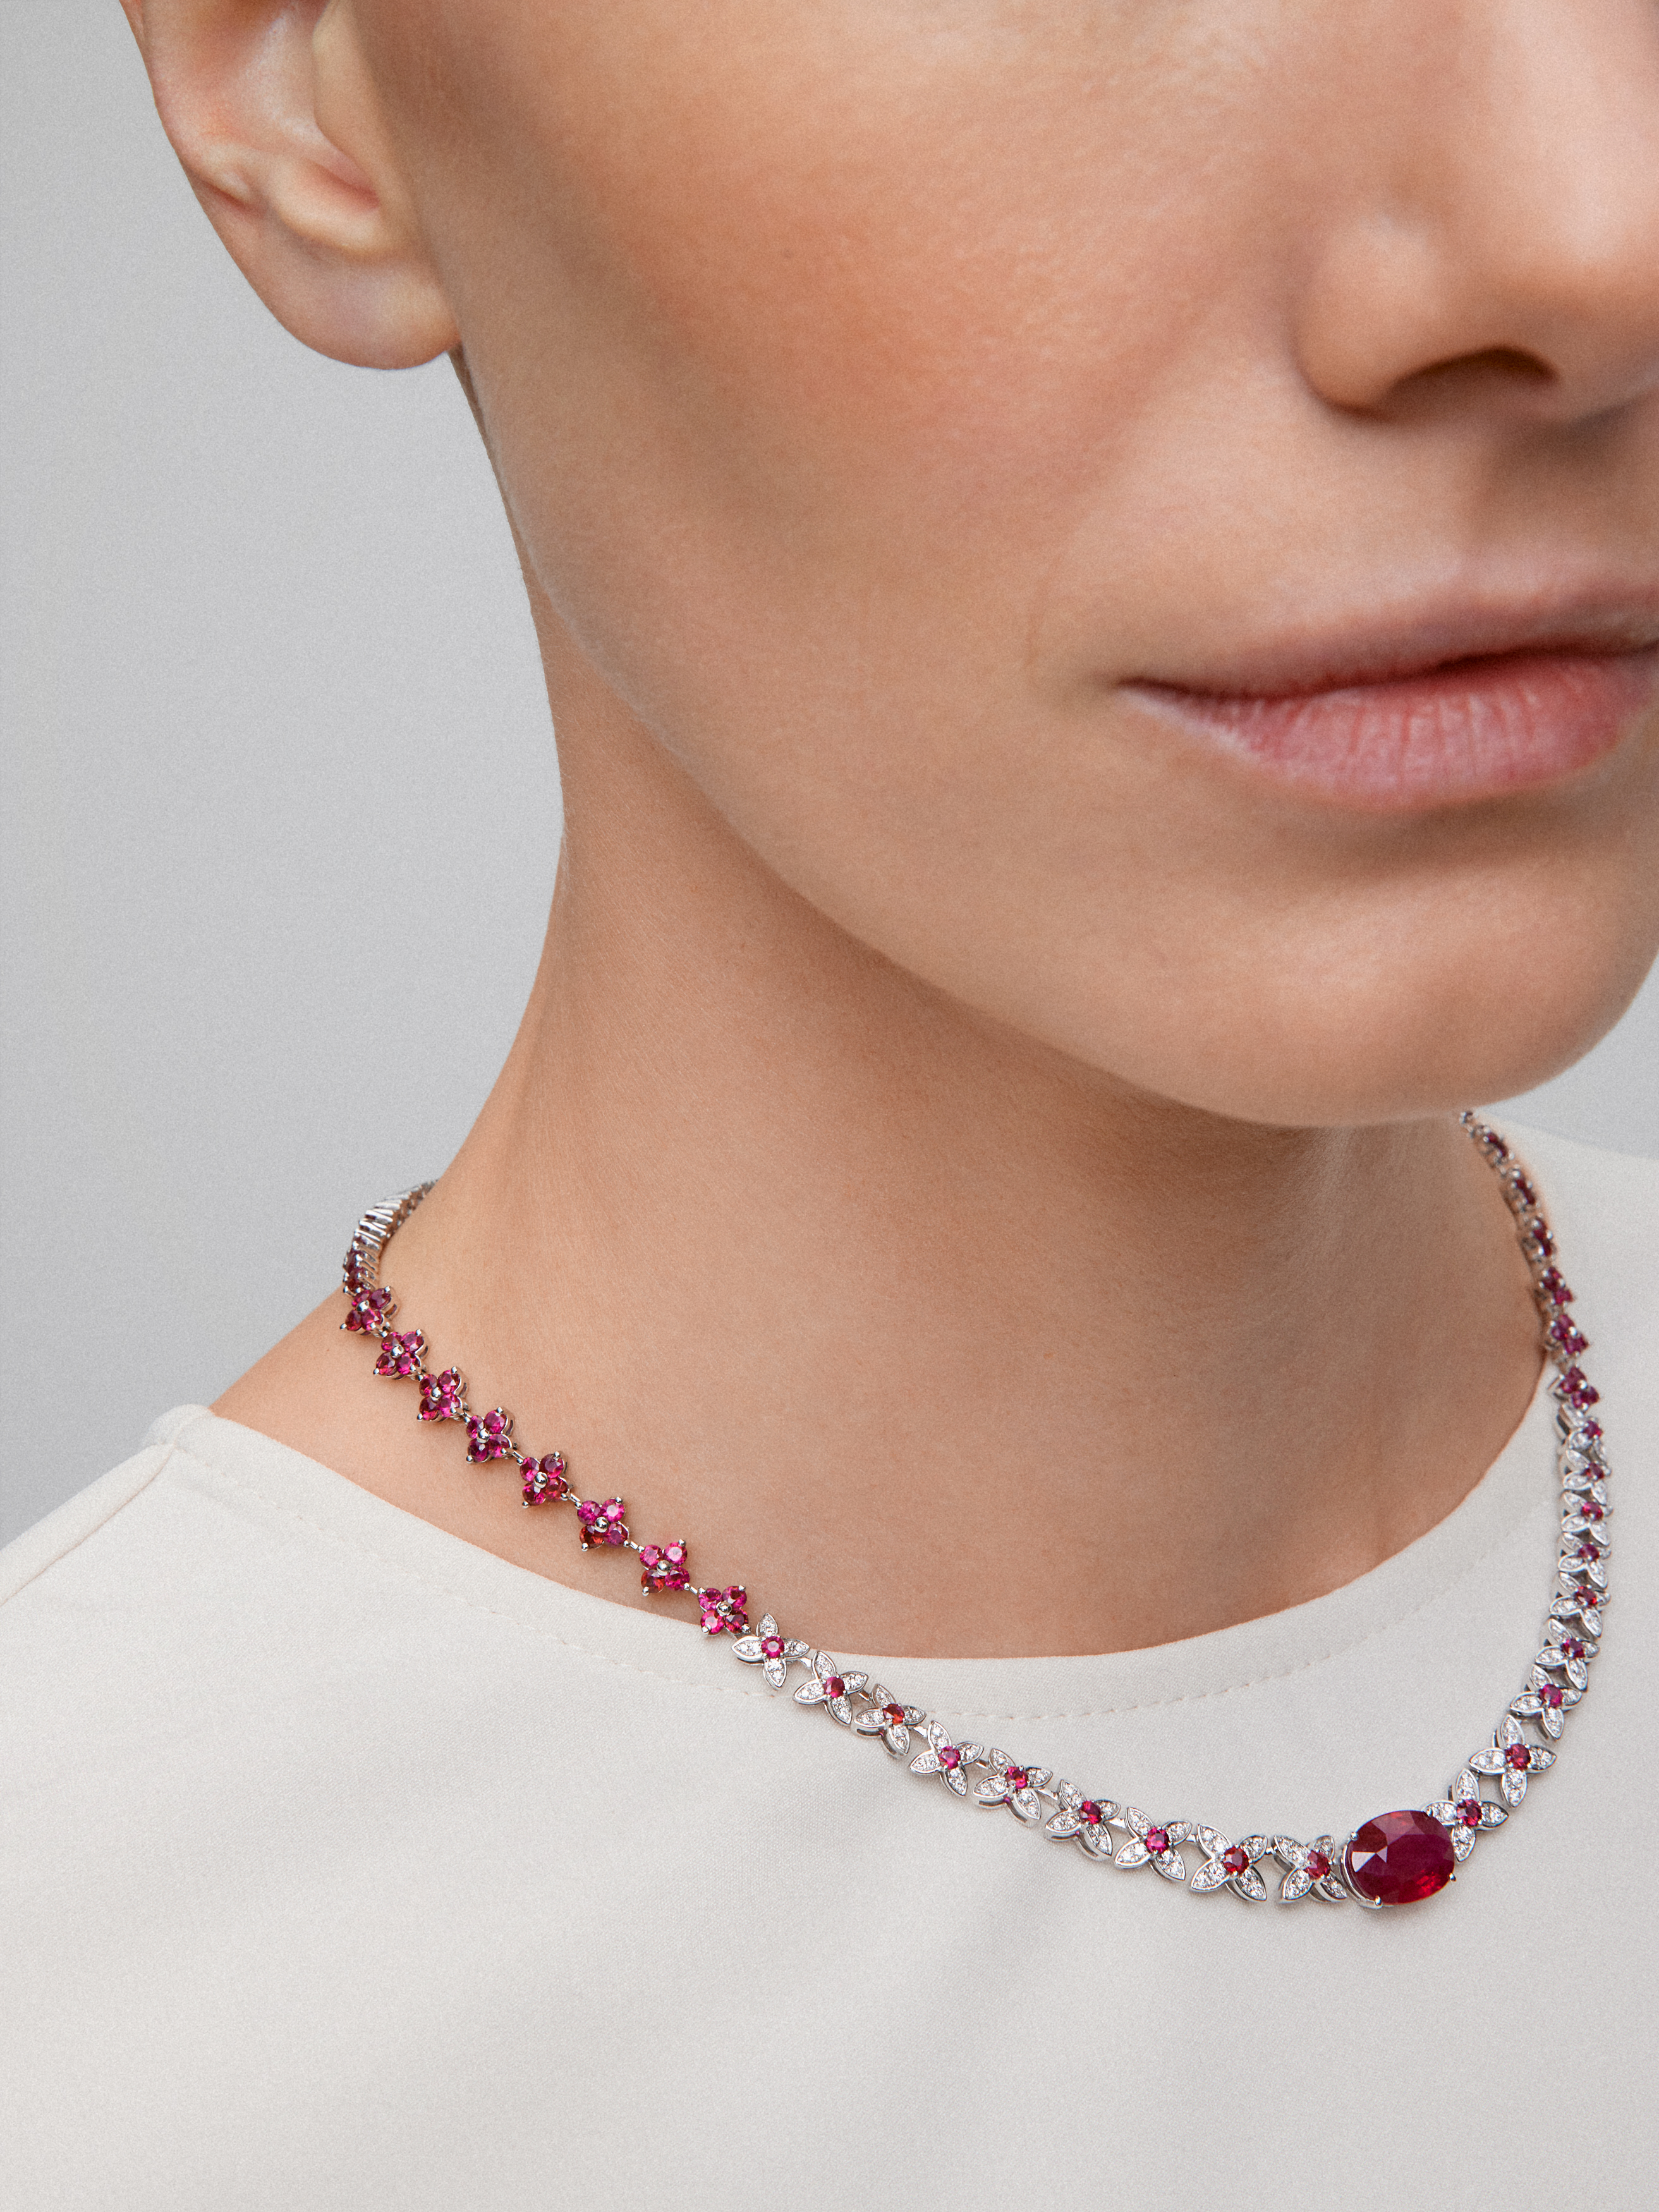 18K white gold necklace with red ruby ​​blod in 5,04 cts oval size, red ruby ​​in 13 cts and white diamonds in bright size of 1.11 cts